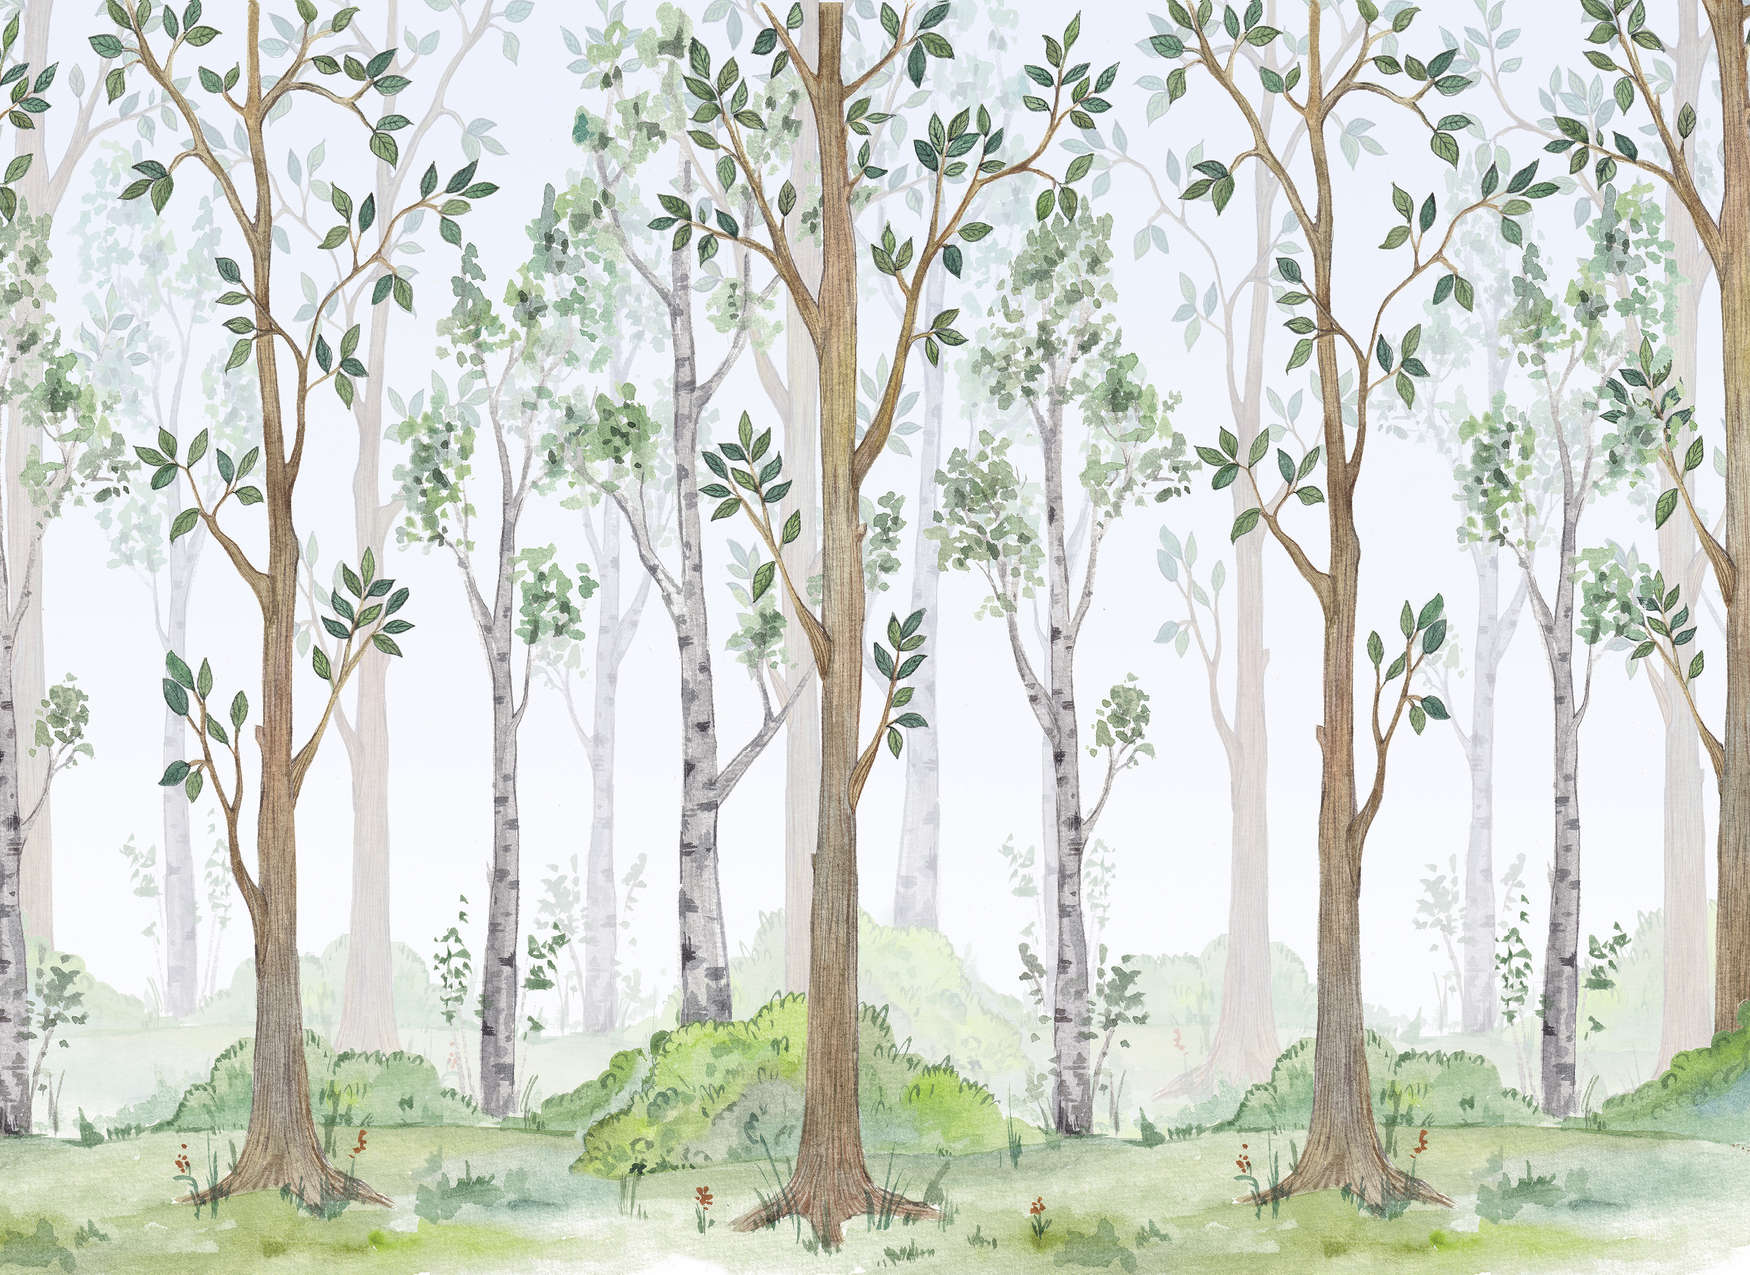             Painted Forest Wallpaper for Nursery - Green, Brown, White
        